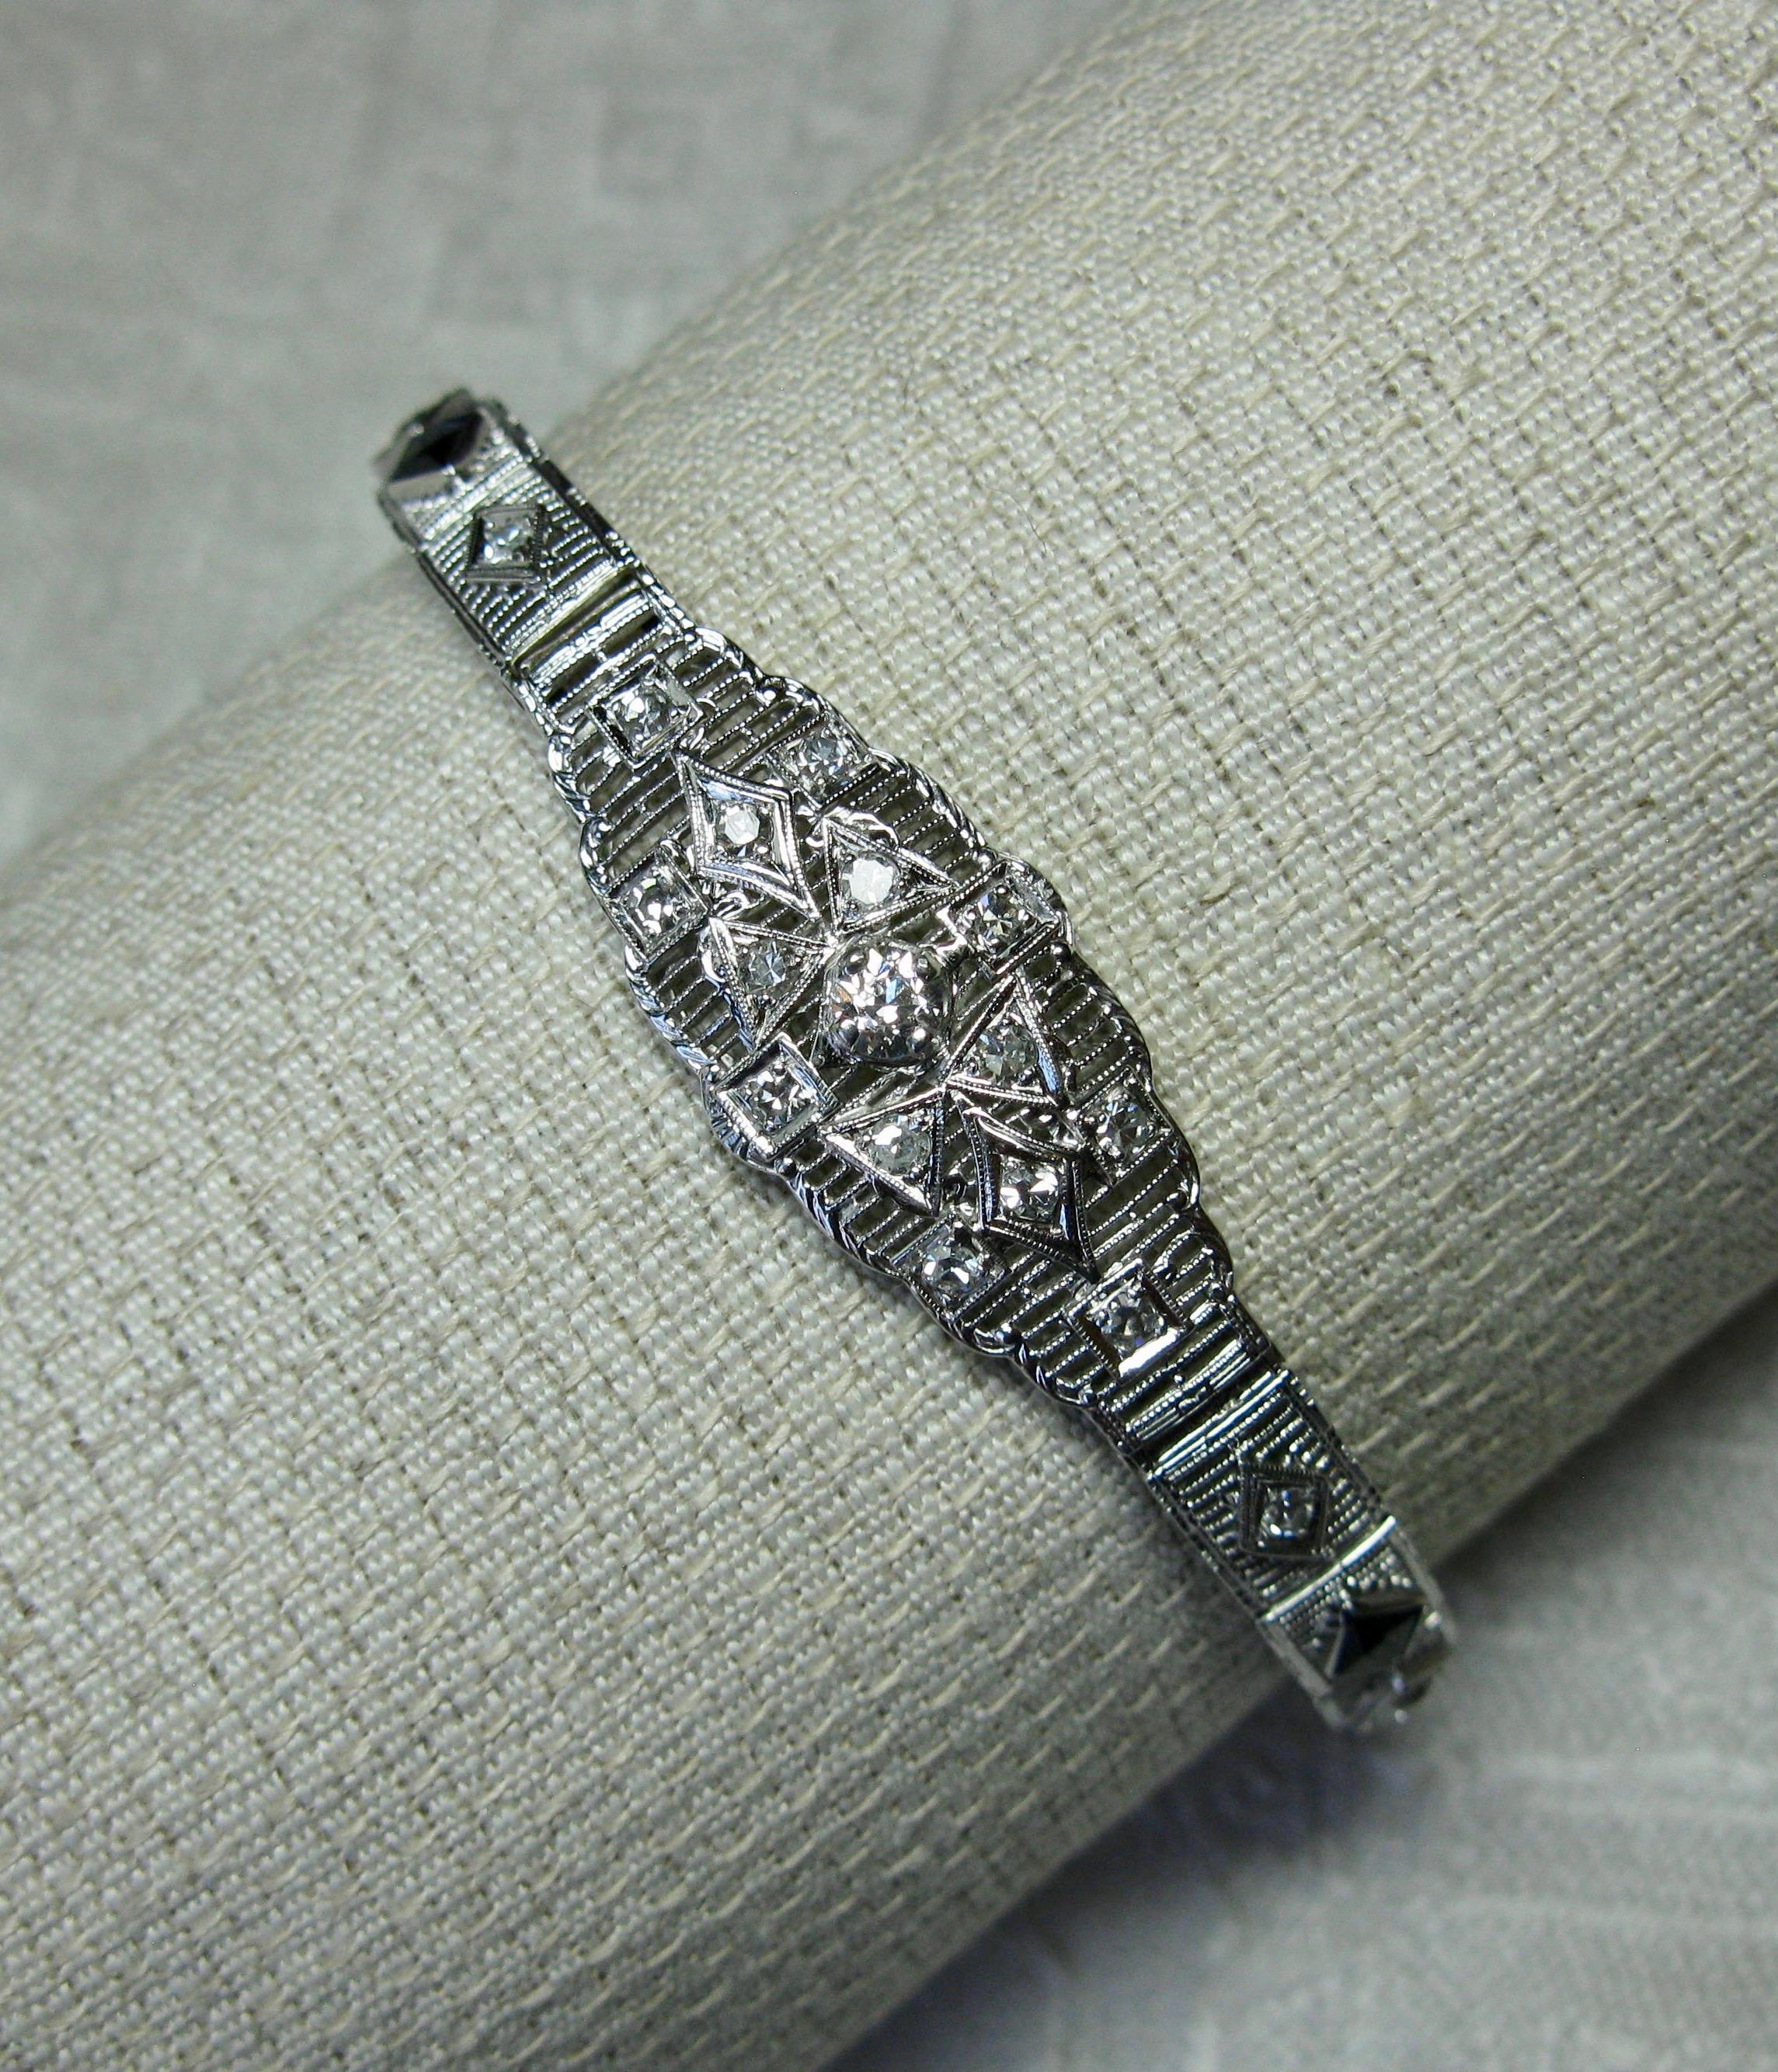 A stunning antique Art Deco Bracelet with extraordinary Deco design set with 29 high quality Diamonds totaling approximately 1.25 Carats and two fancy cut Sapphires.  The central diamond is a .20 Carat Old Mine Cut Diamond of very white H color, and